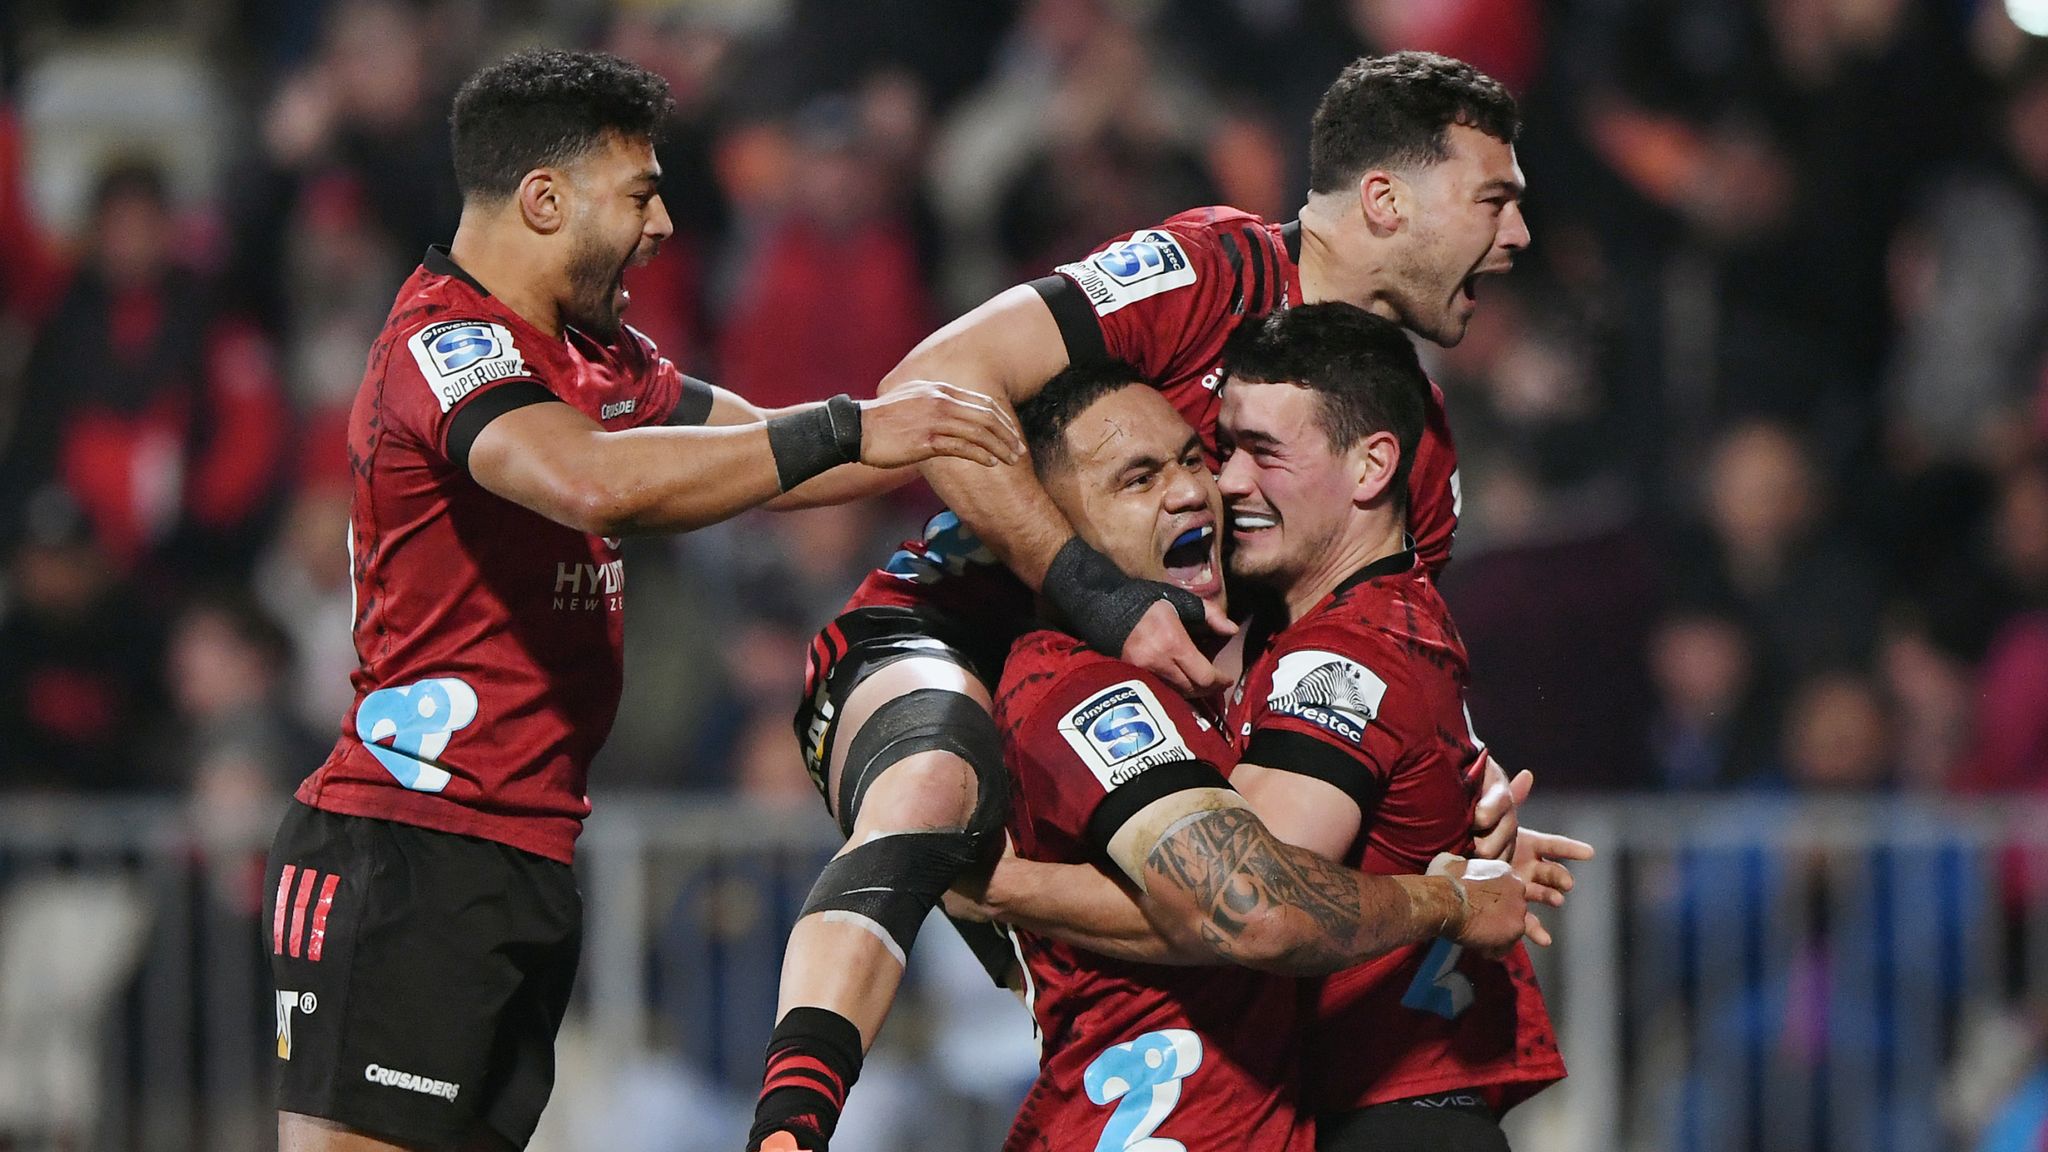 Crusaders 26-15 Blues Home side come back to nudge past Blues Rugby Union News Sky Sports